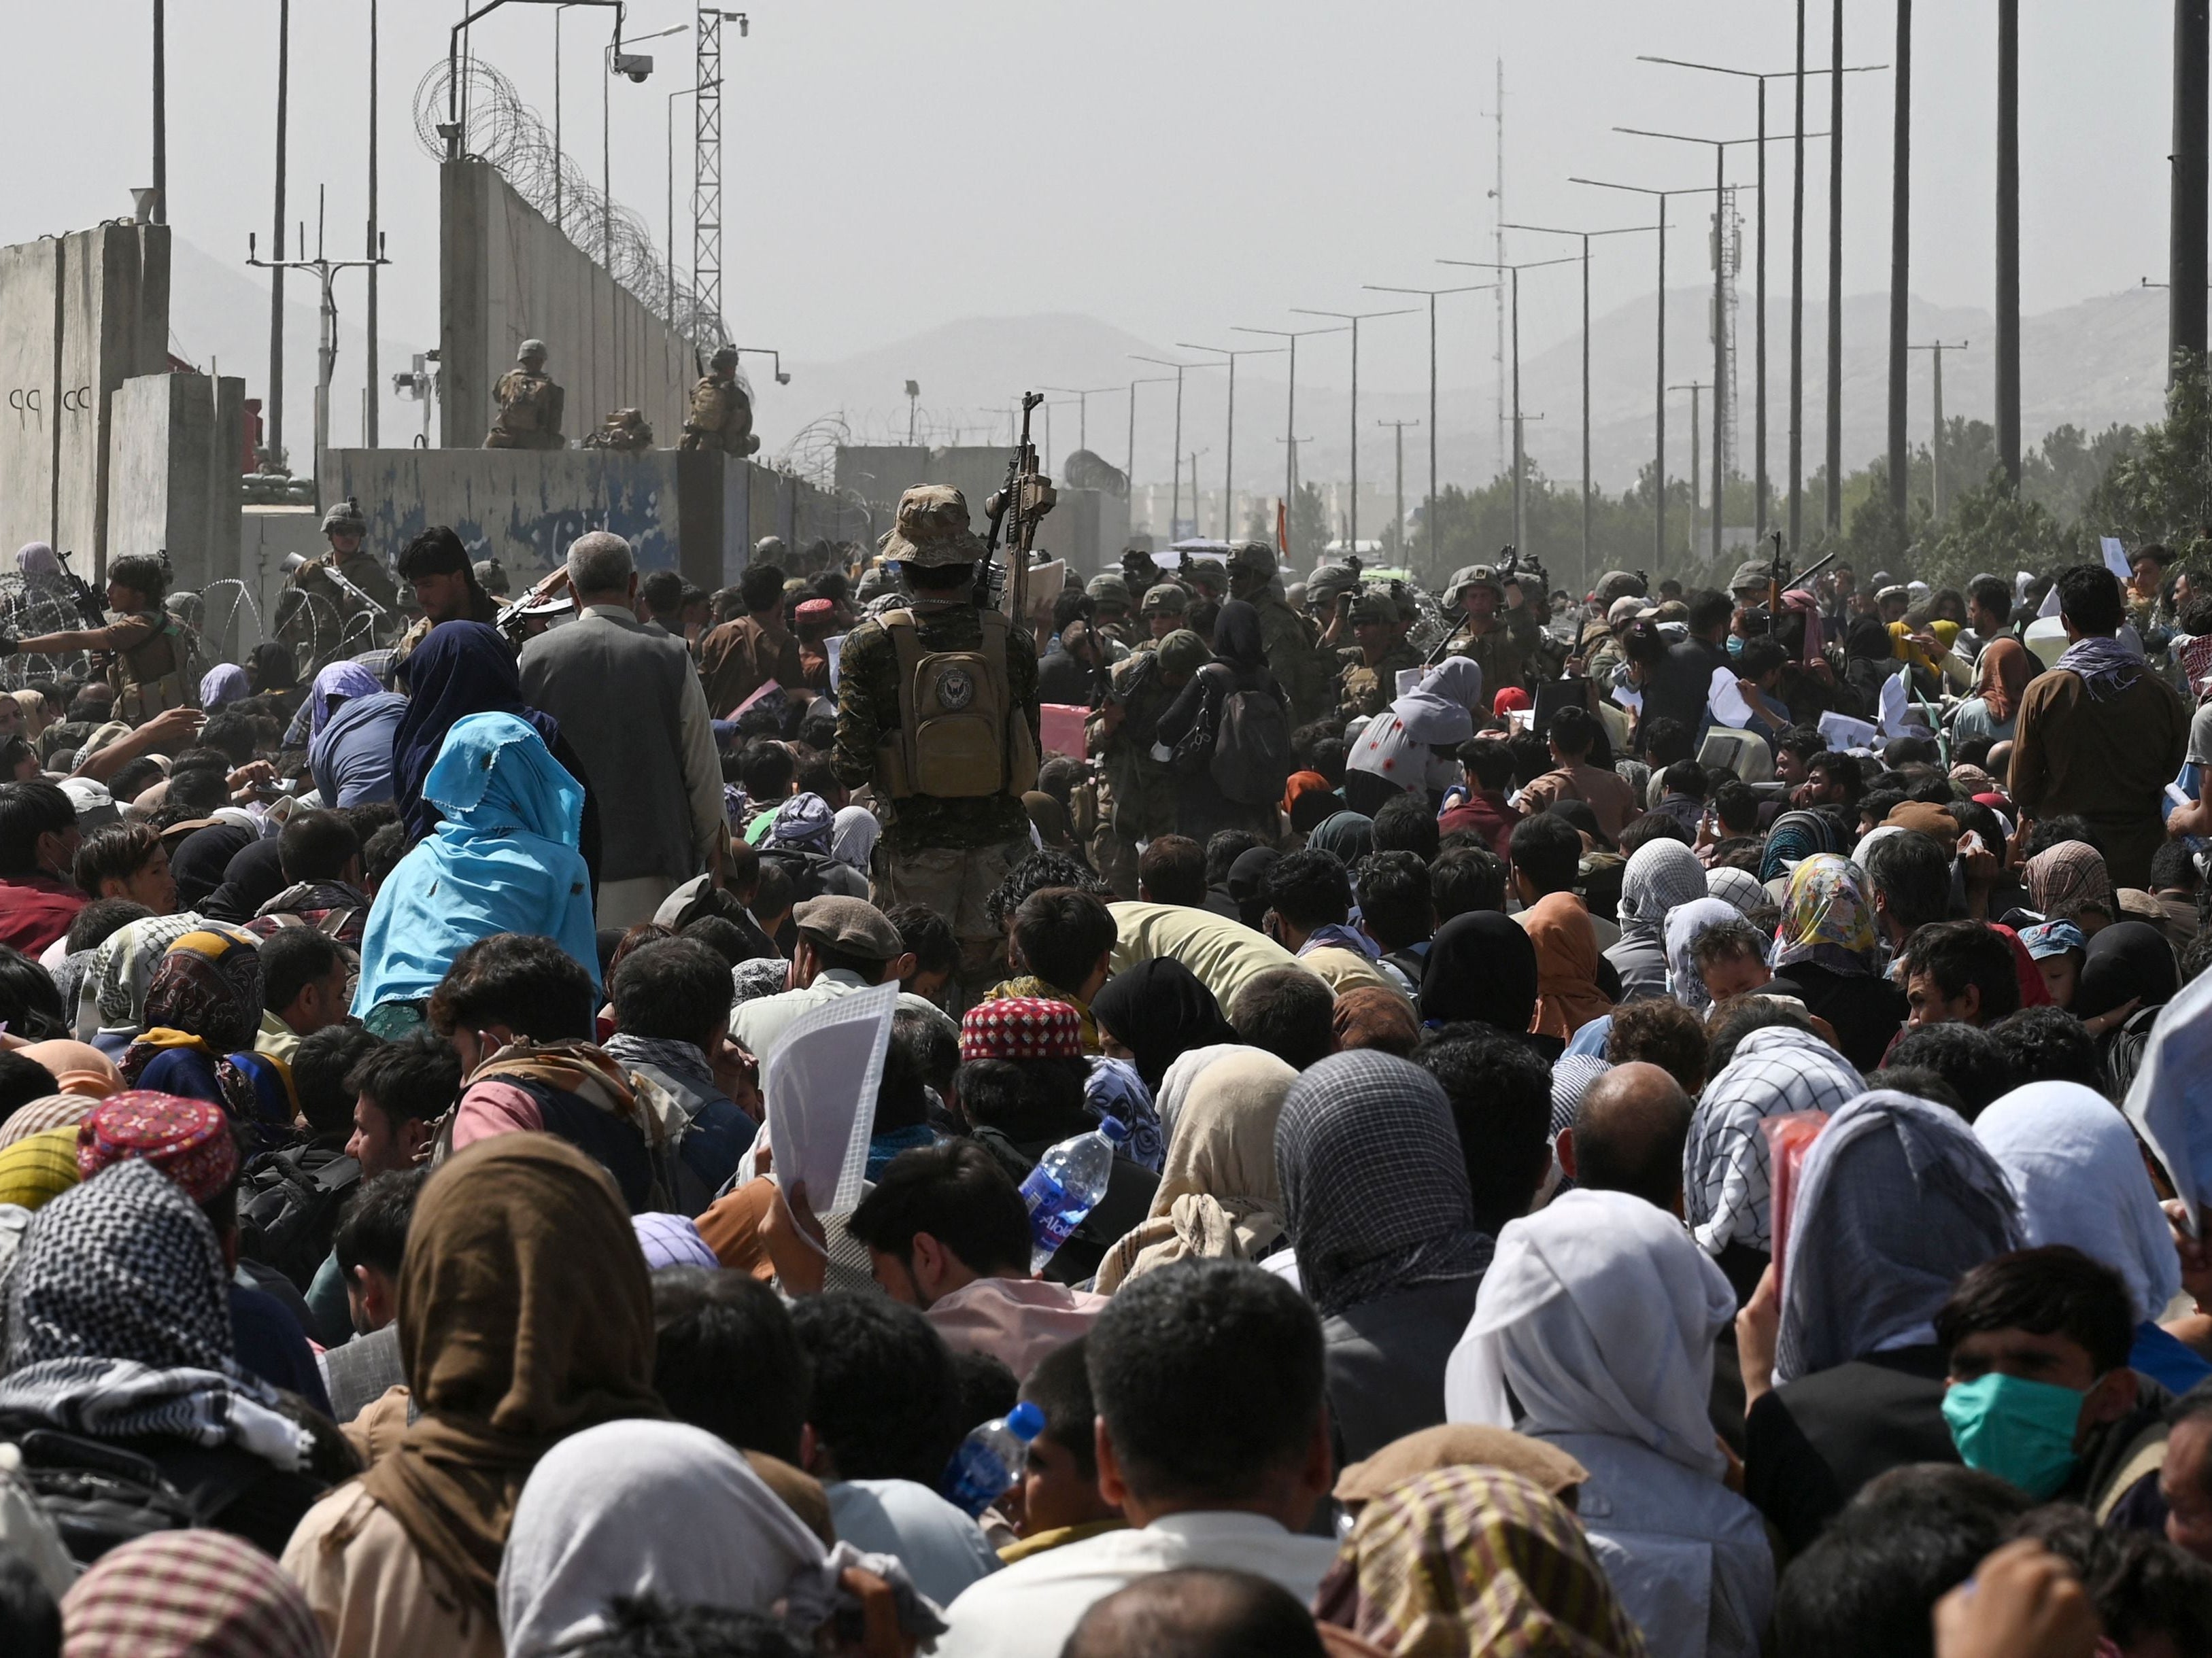 File: Afghans gather on a roadside near the Kabul airport on 20 August 2021, hoping to flee from Taliban rule in the country